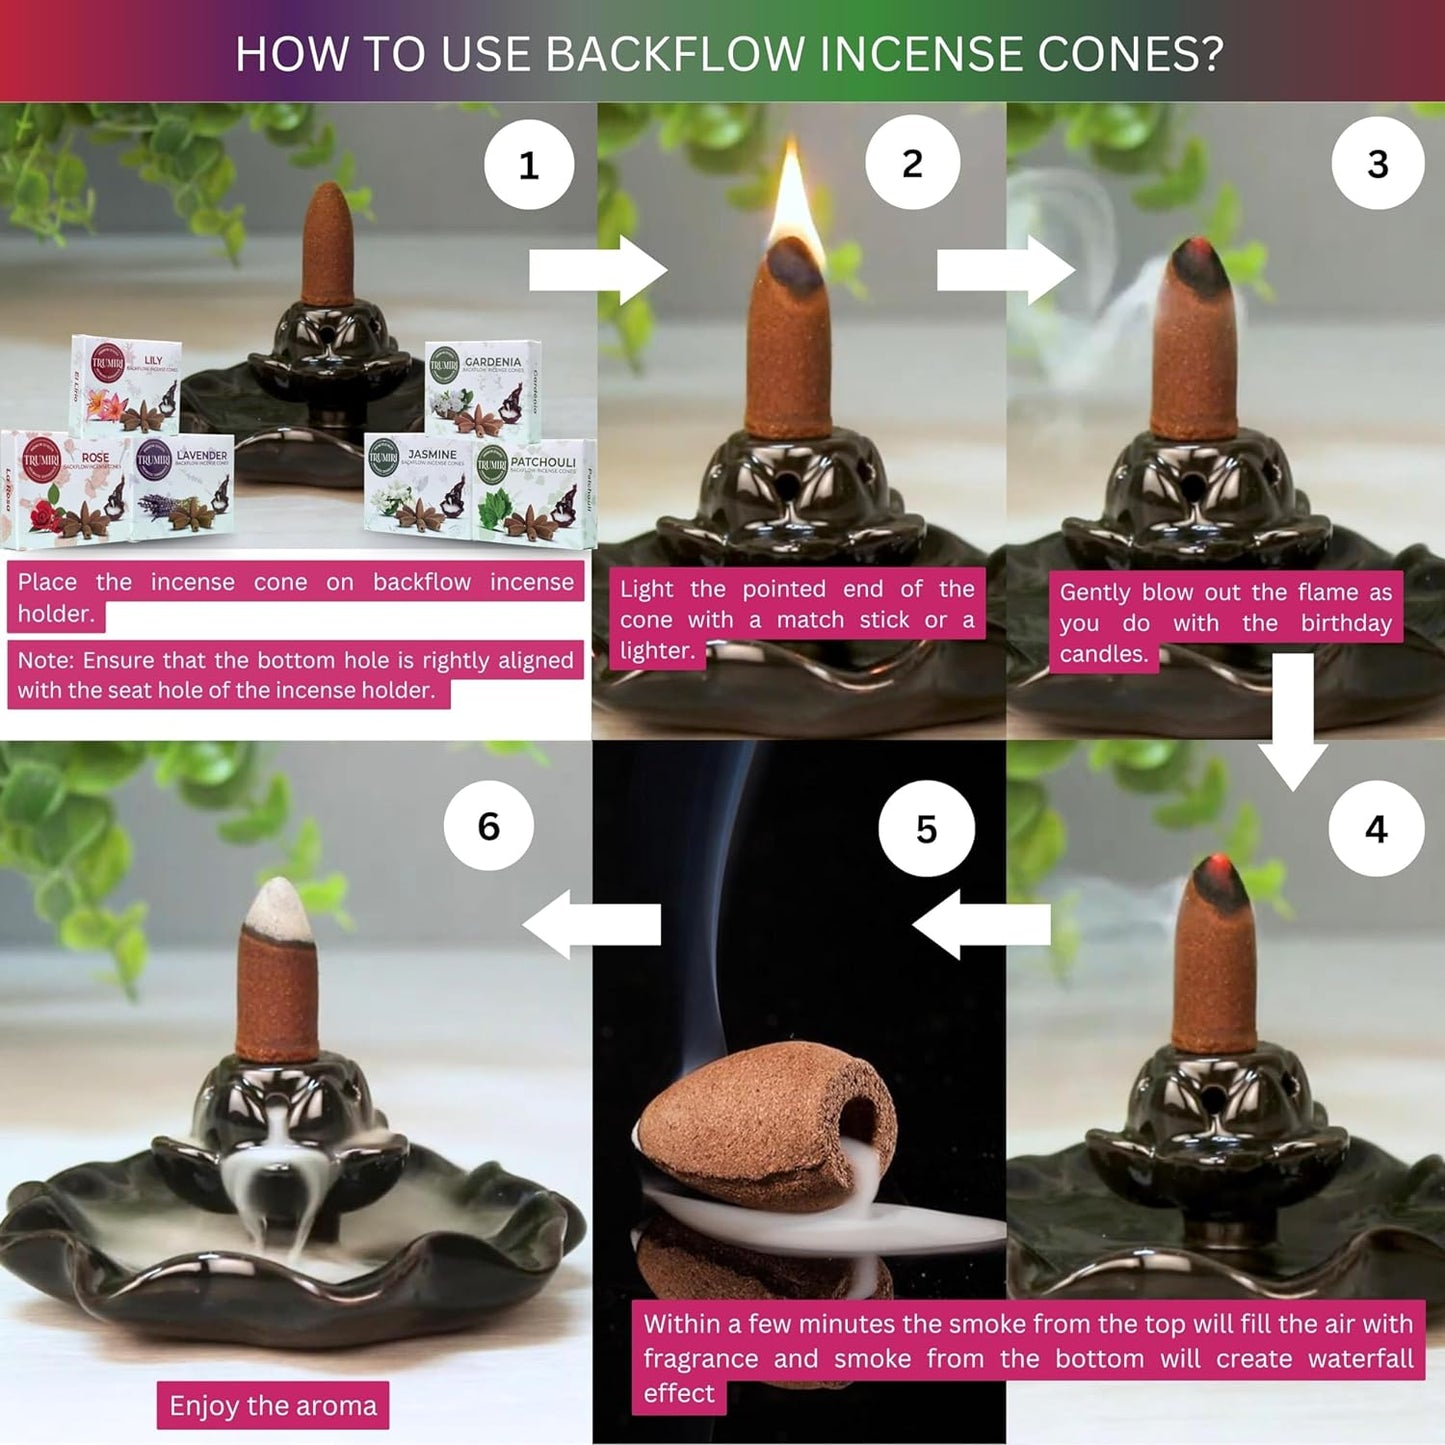 Trumiri Floral Scents Backflow Incense Cones Variety Pack of 6 Scents with 10 Backflow Cones per Scent - Total 60 Cones